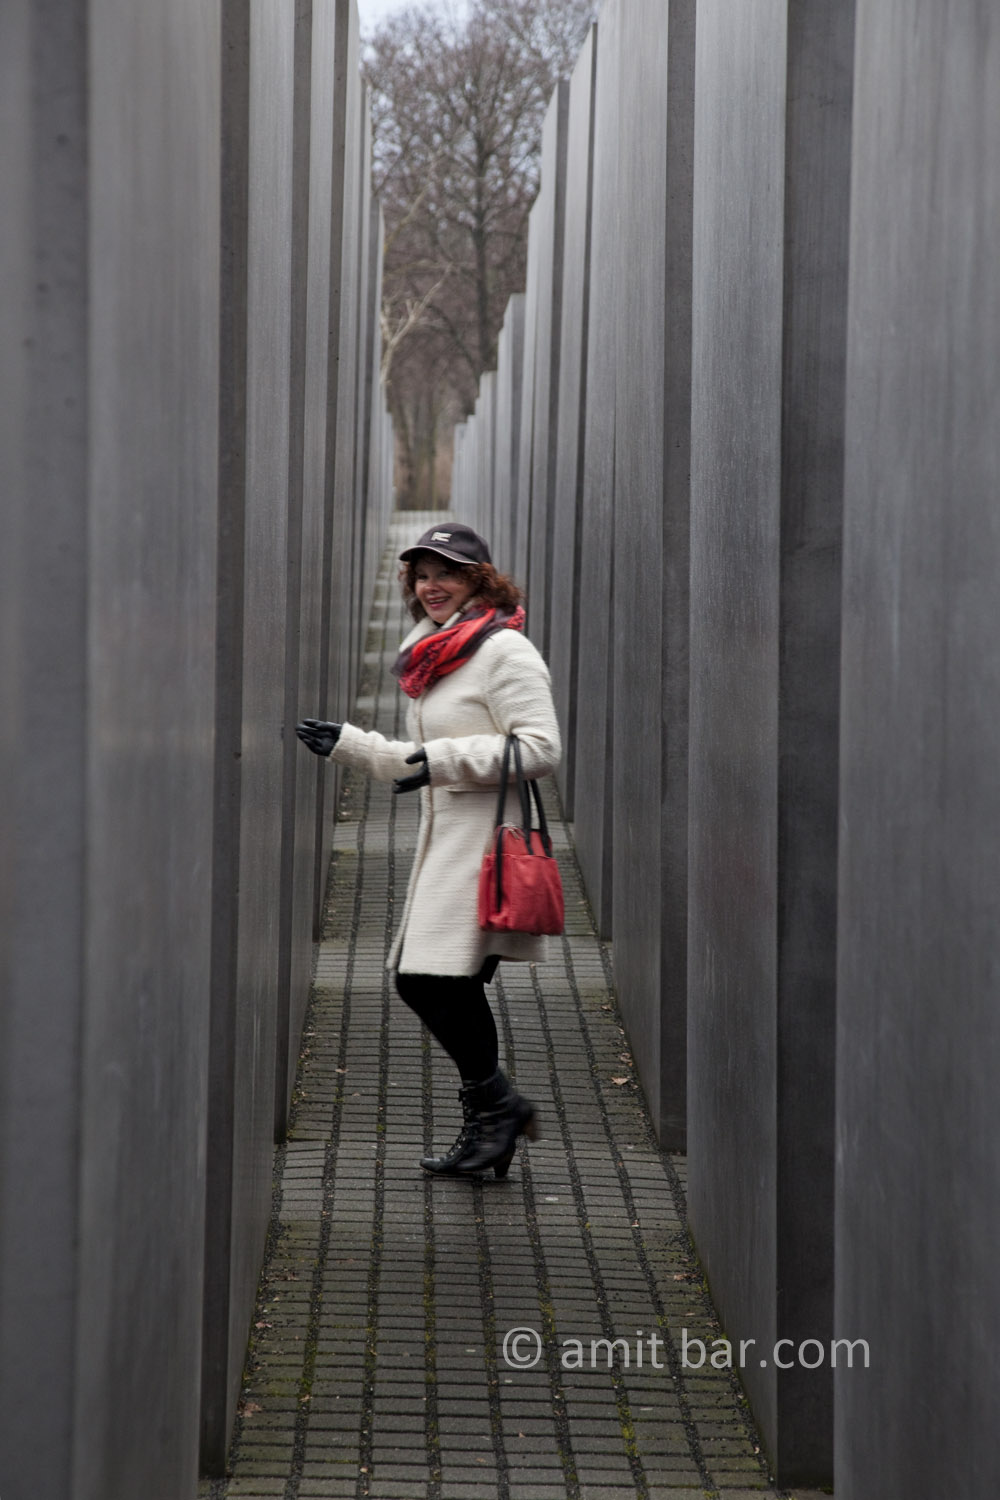 Berlin: Contrasts. The Holocaust monument